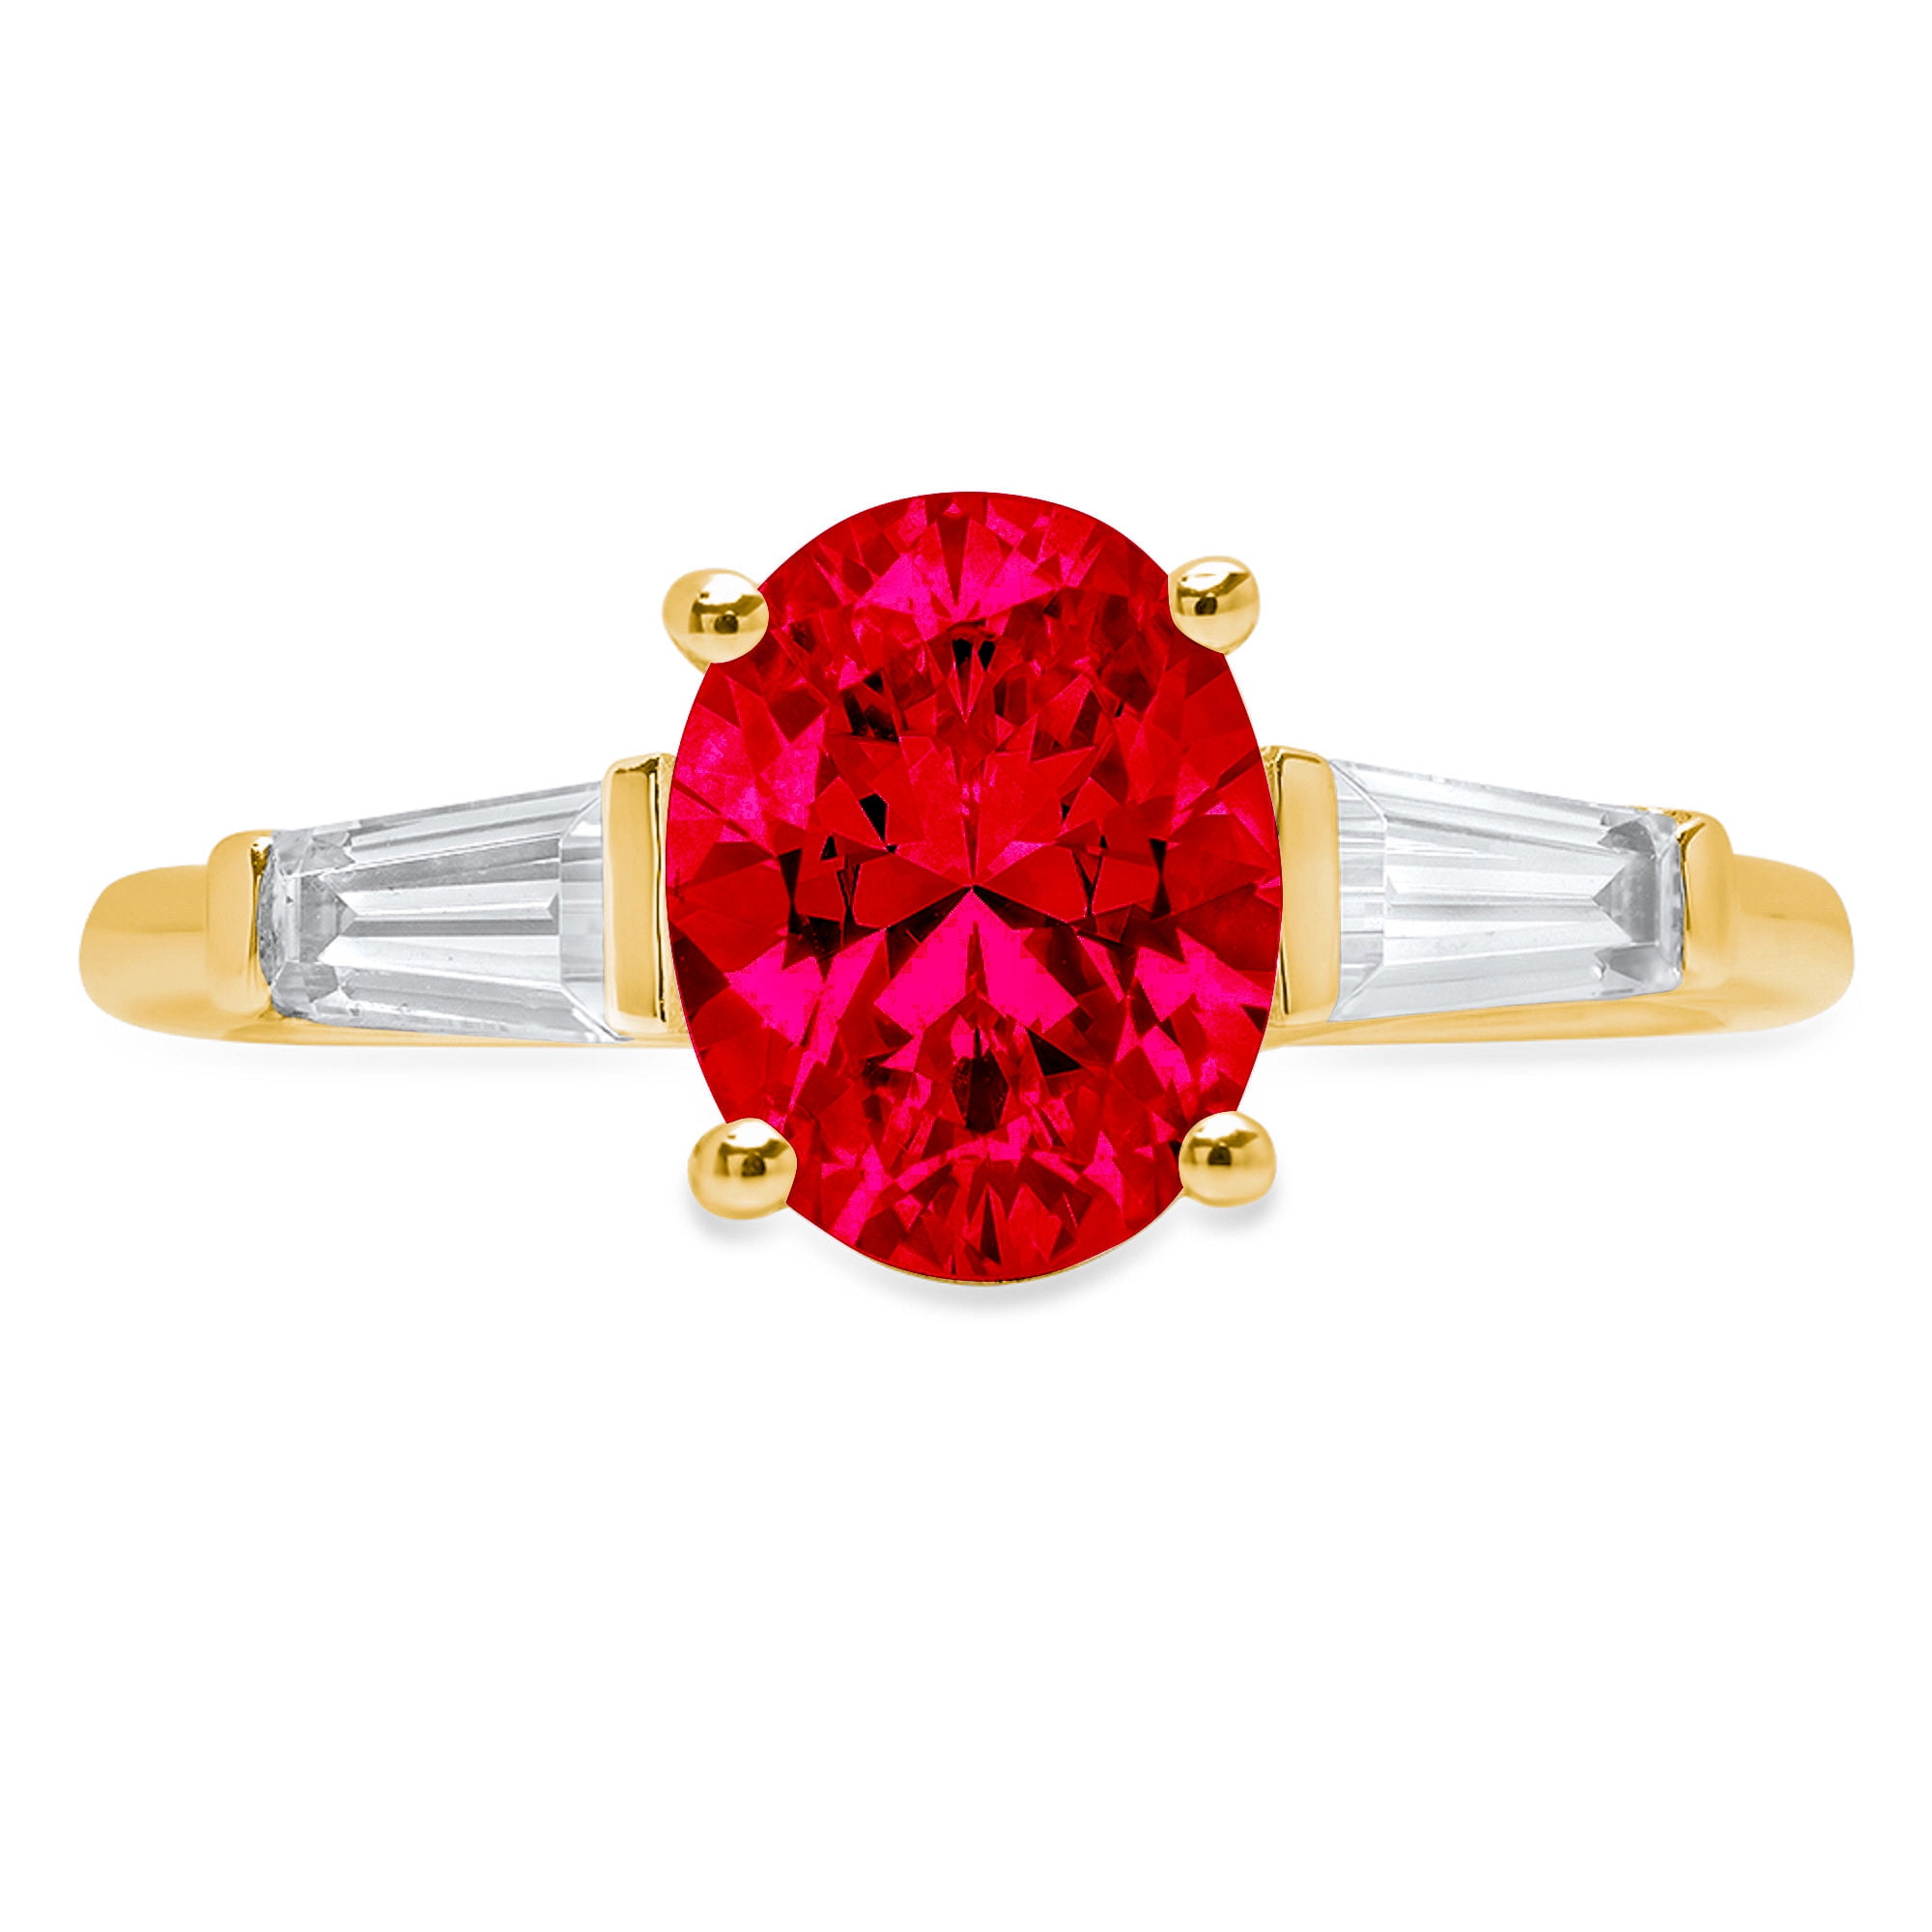 Vintage 2.5ct Oval Cut Red Ruby 14k Yellow Gold Finish Solitaire Engagement Ring 